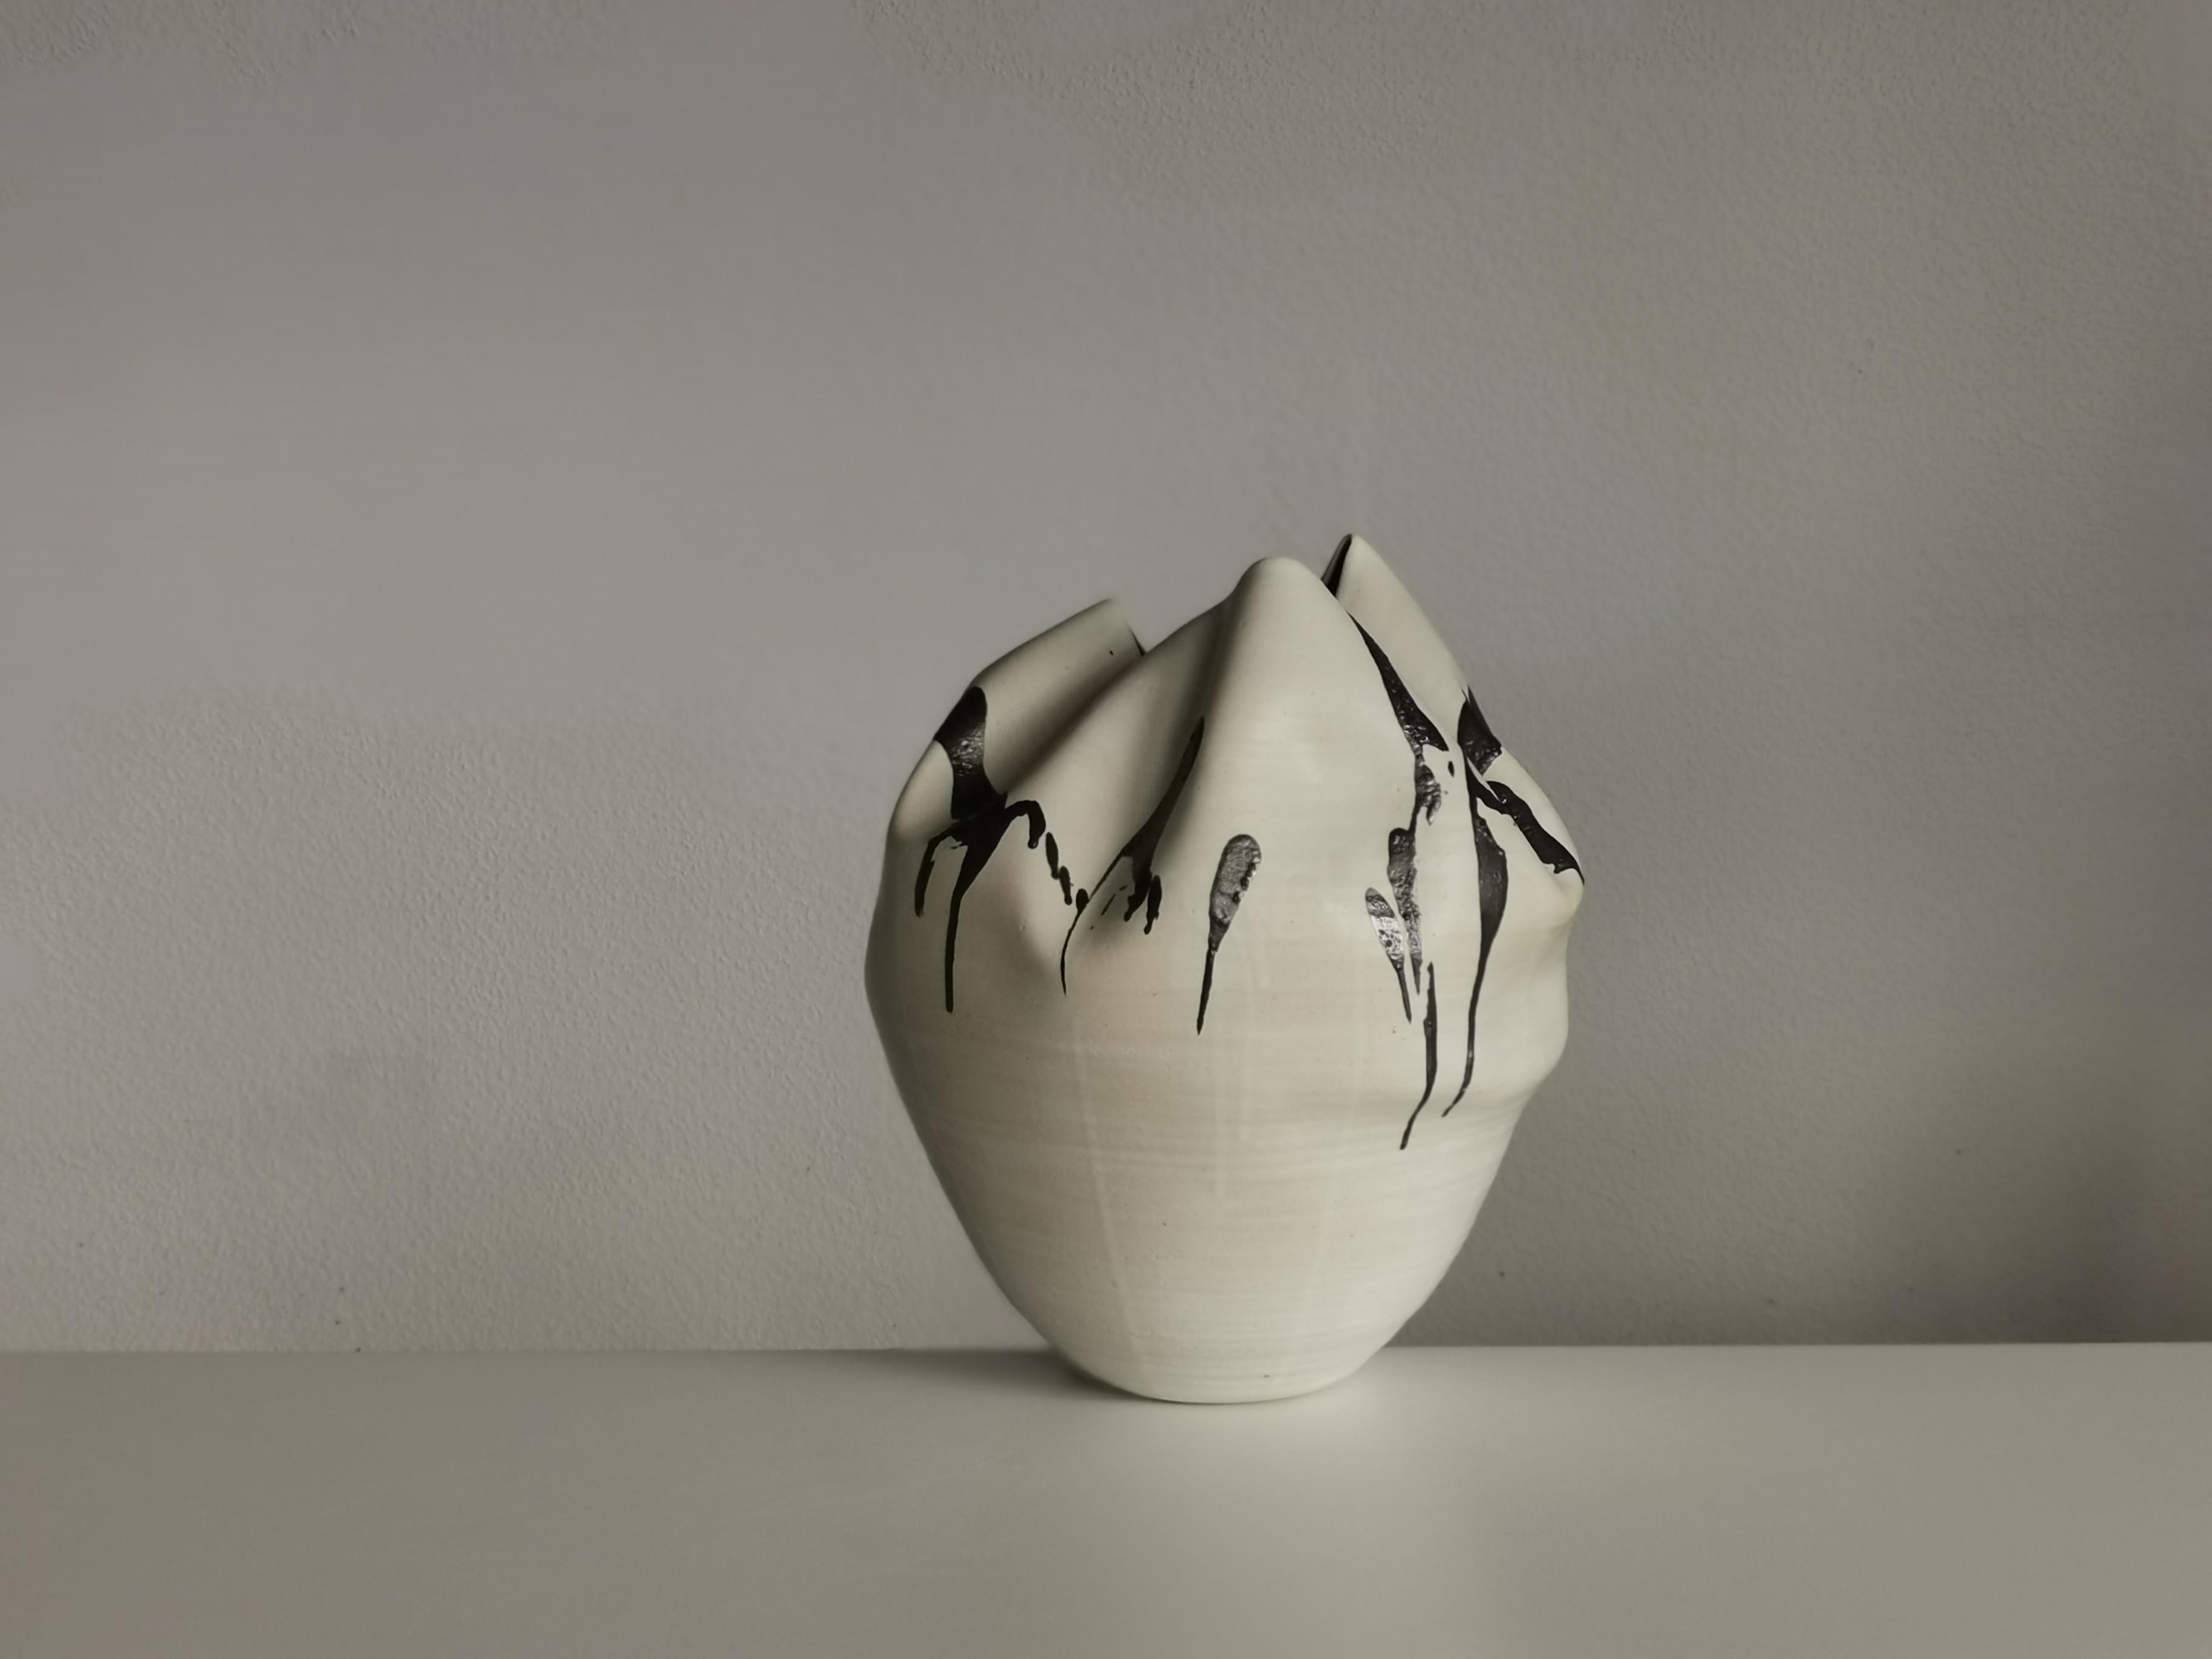 New sumptuous ceramic vessel from ceramic artist Nicholas Arroyave-Portela. Made in 2022.

Materials: White St.Thomas clay, Stoneware glazes, multi fired to cone 9 (1260 degrees)

Measures: 37 cm tall, 35 cm wide, 30 cm deep
Weight: 4.2 Kg

The